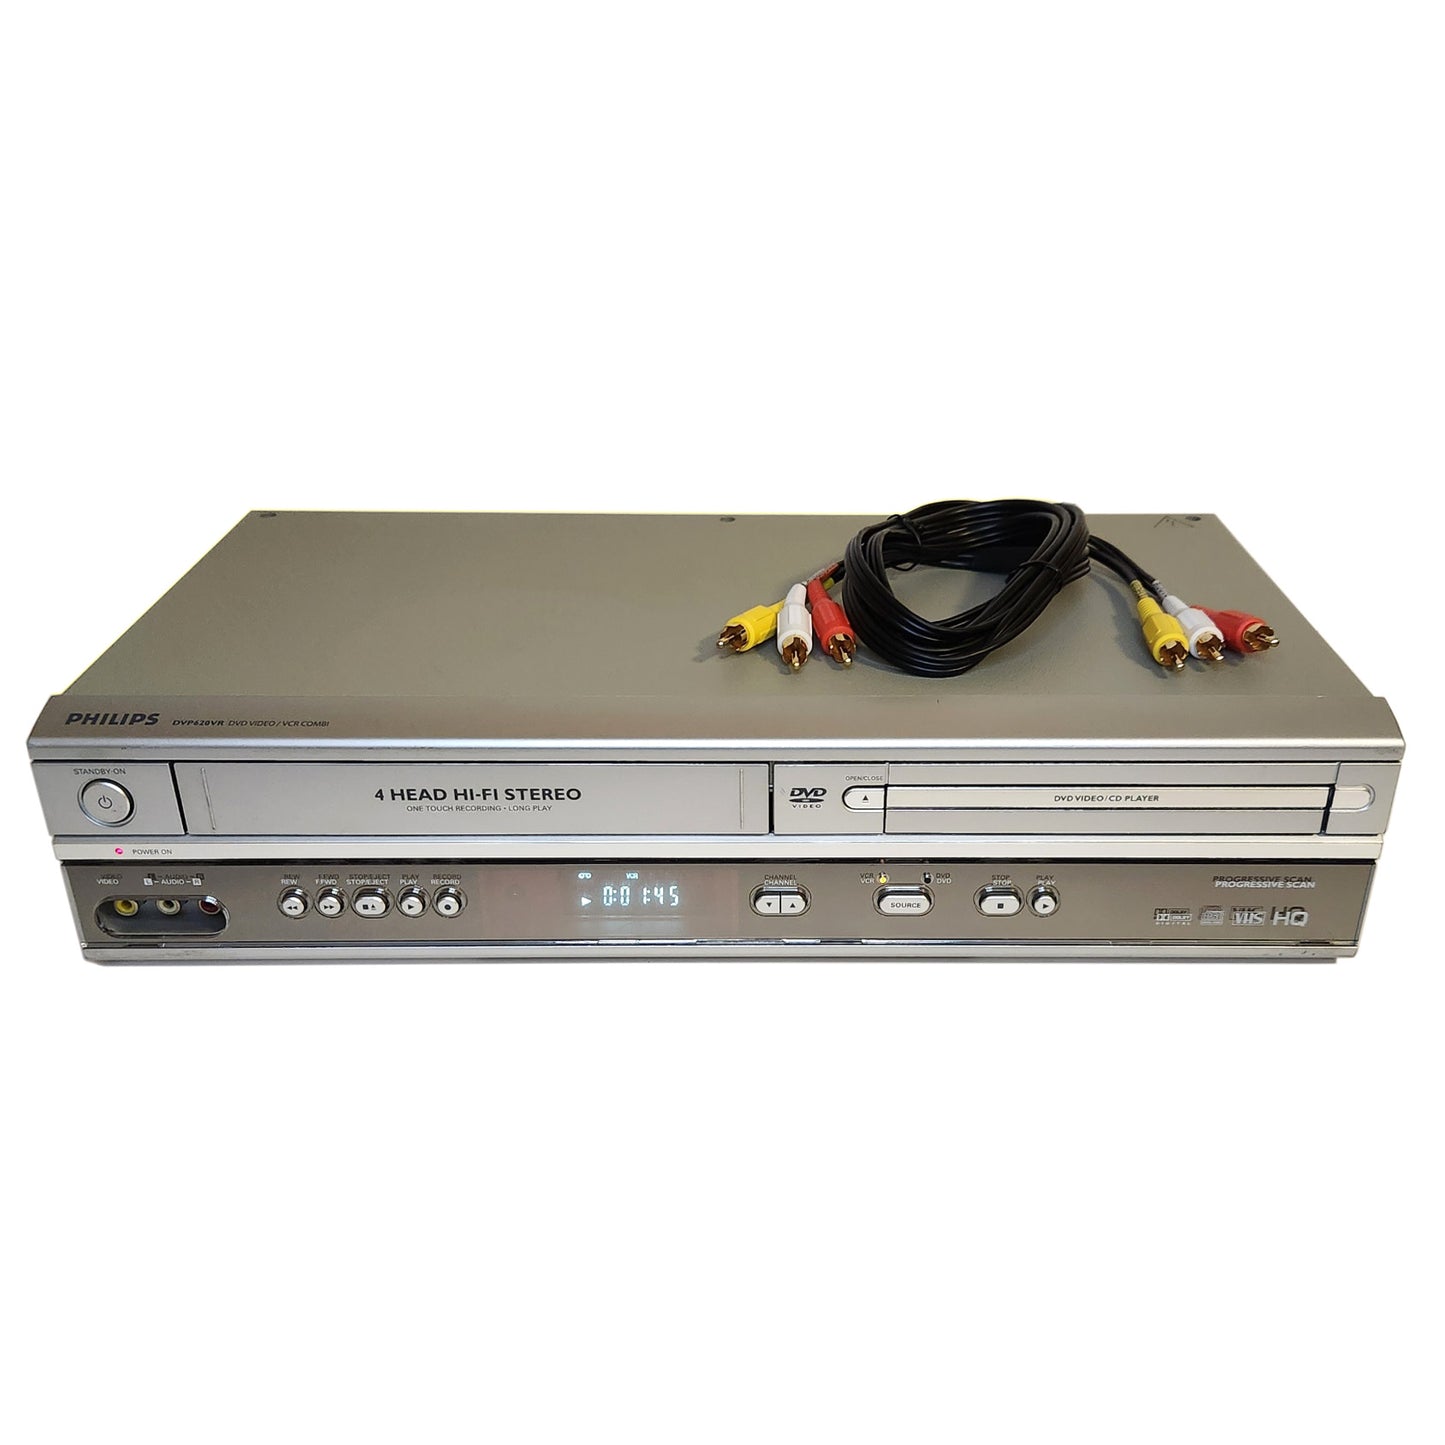 Philips DVP620VR VCR/DVD Player Combo